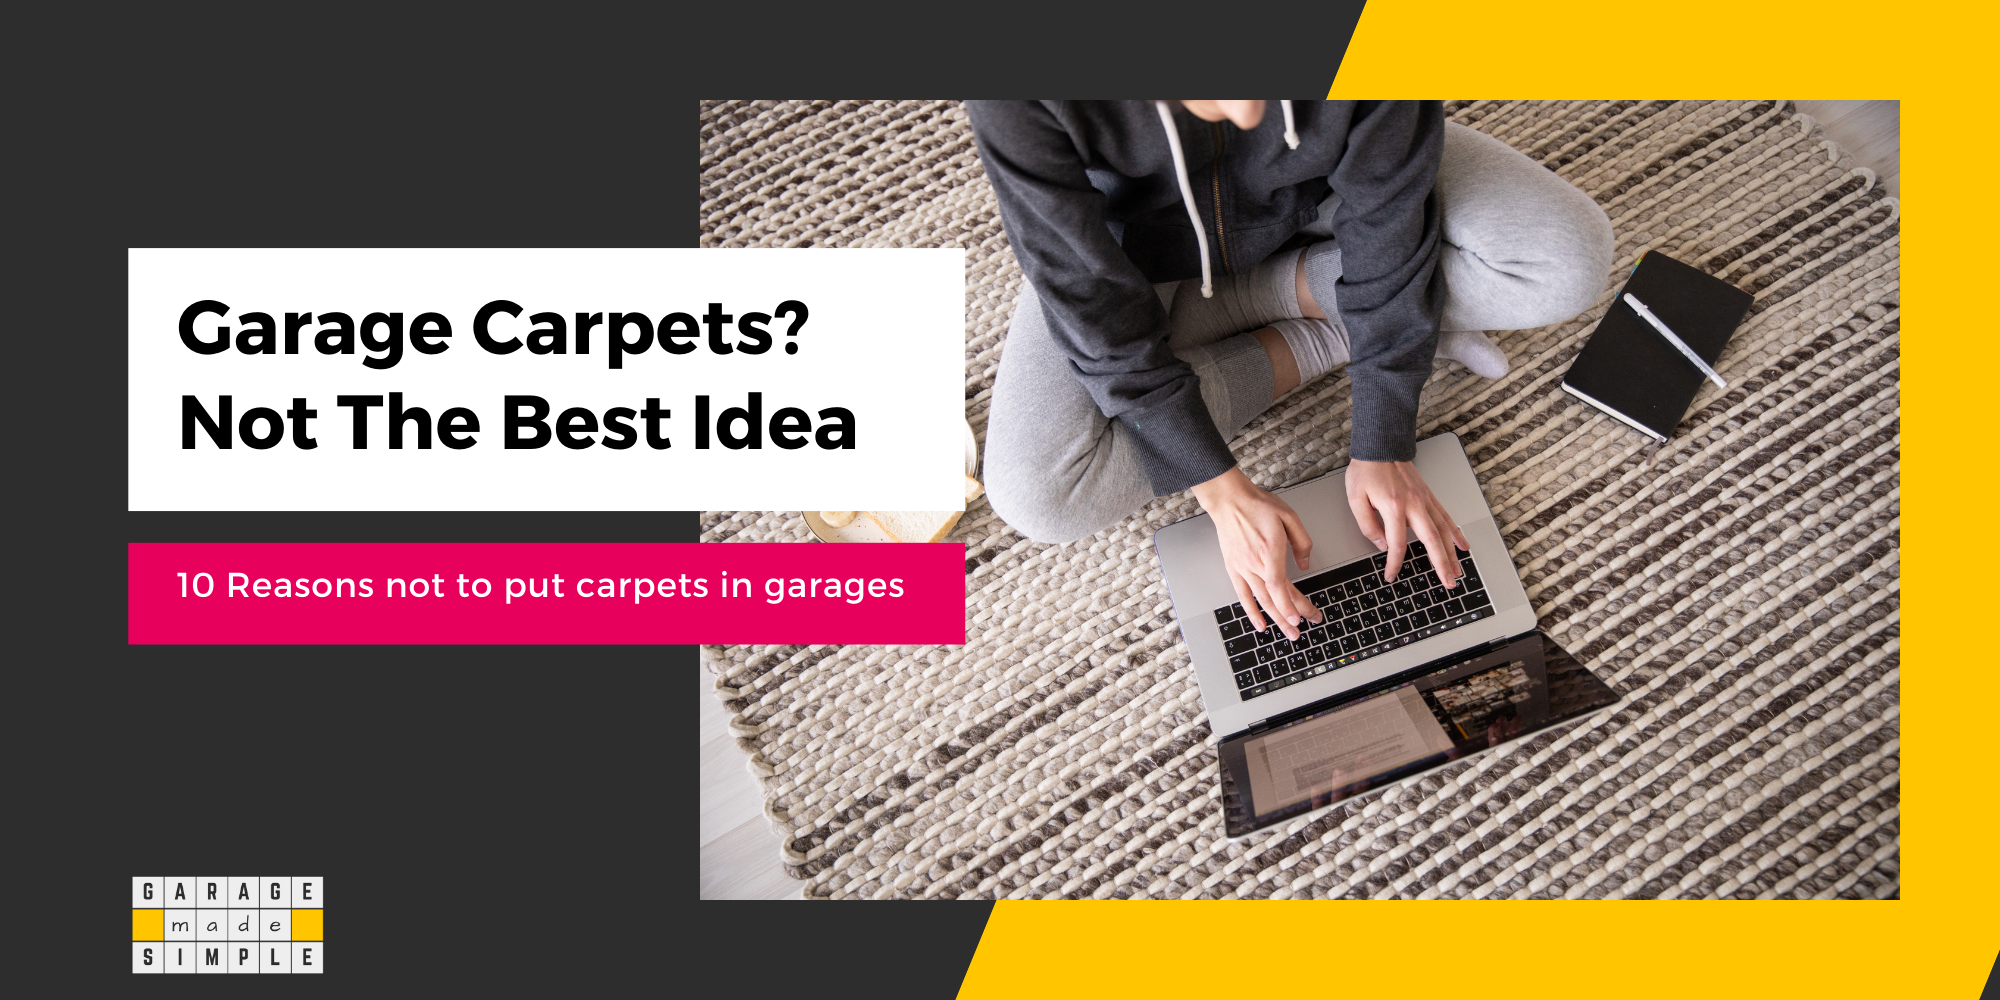 10 Reasons Why Garage Carpets Aren’t the Best Idea